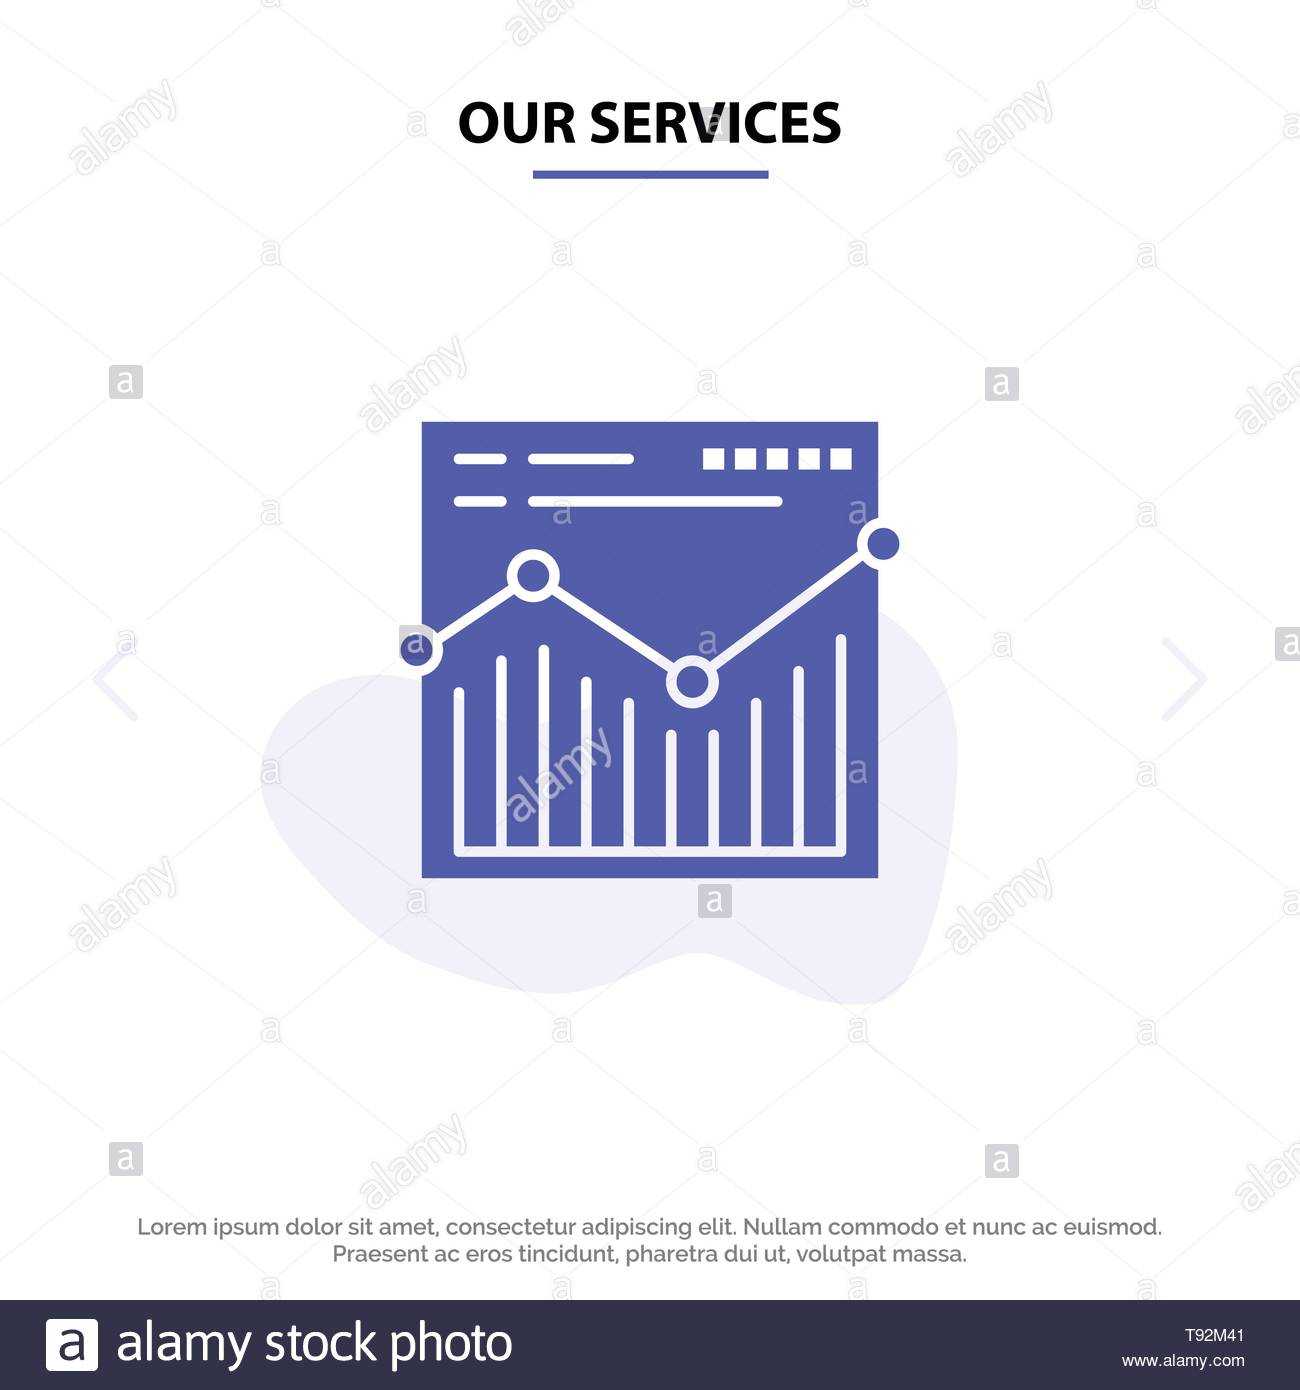 Our Services Analysis, Web, Website, Report Solid Glyph Icon Intended For Stock Analysis Report Template